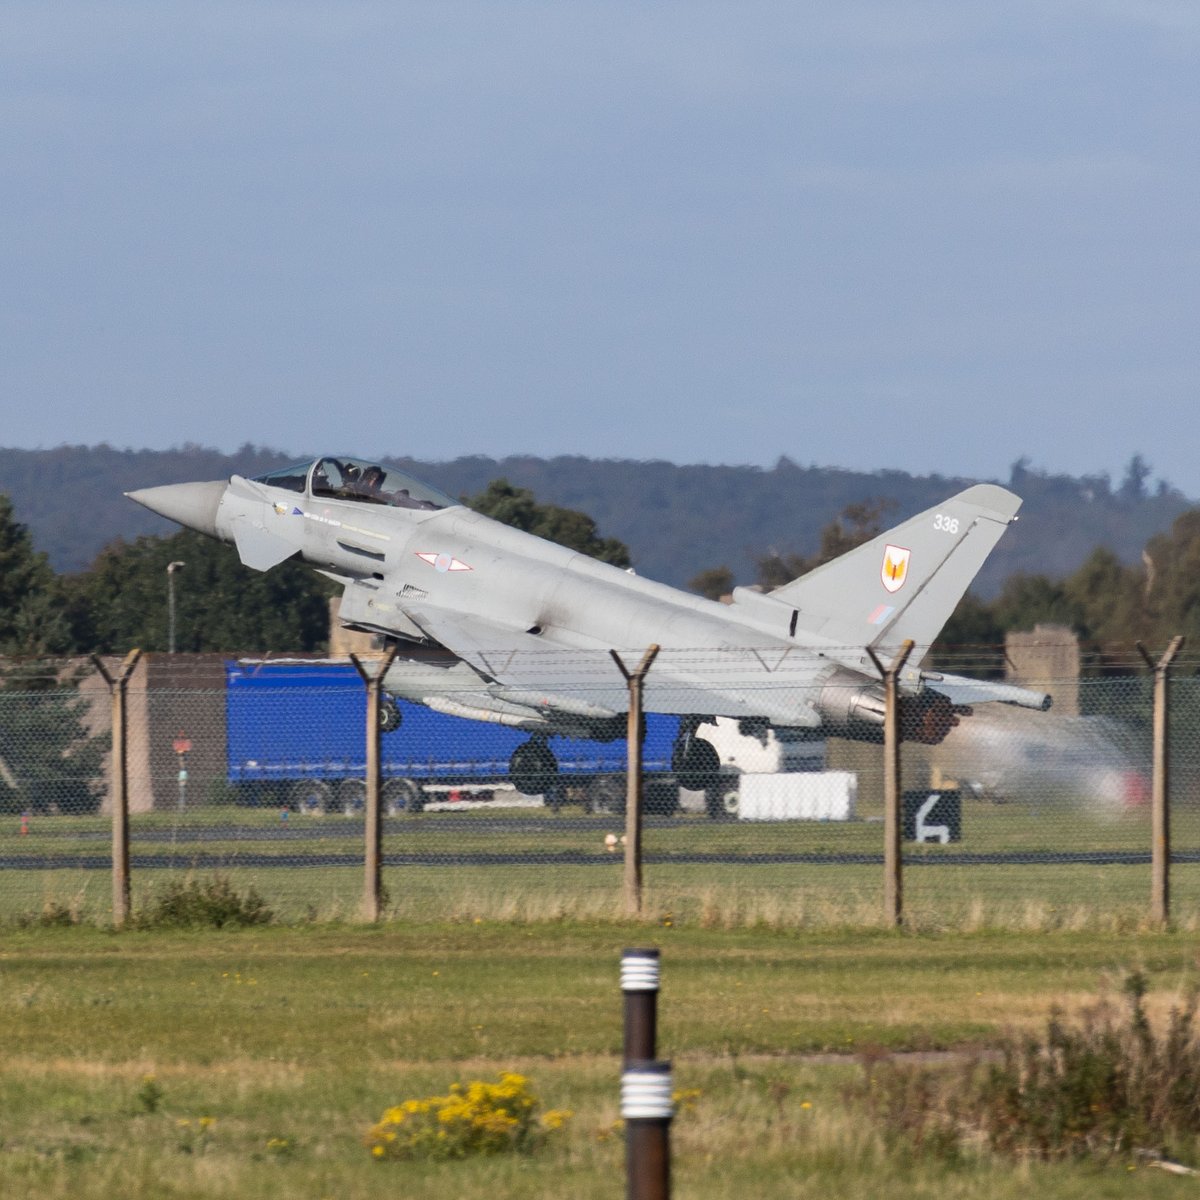  QRA Typhoons were scrambled from Leuchars Station in Fife, and routed to intercept the two aircraft.  They were identified as two Russian Air Force Tu-142 Bear F. These are Anti-Submarine Warfare and Maritime Patrol aircraft. 4/ #QRA